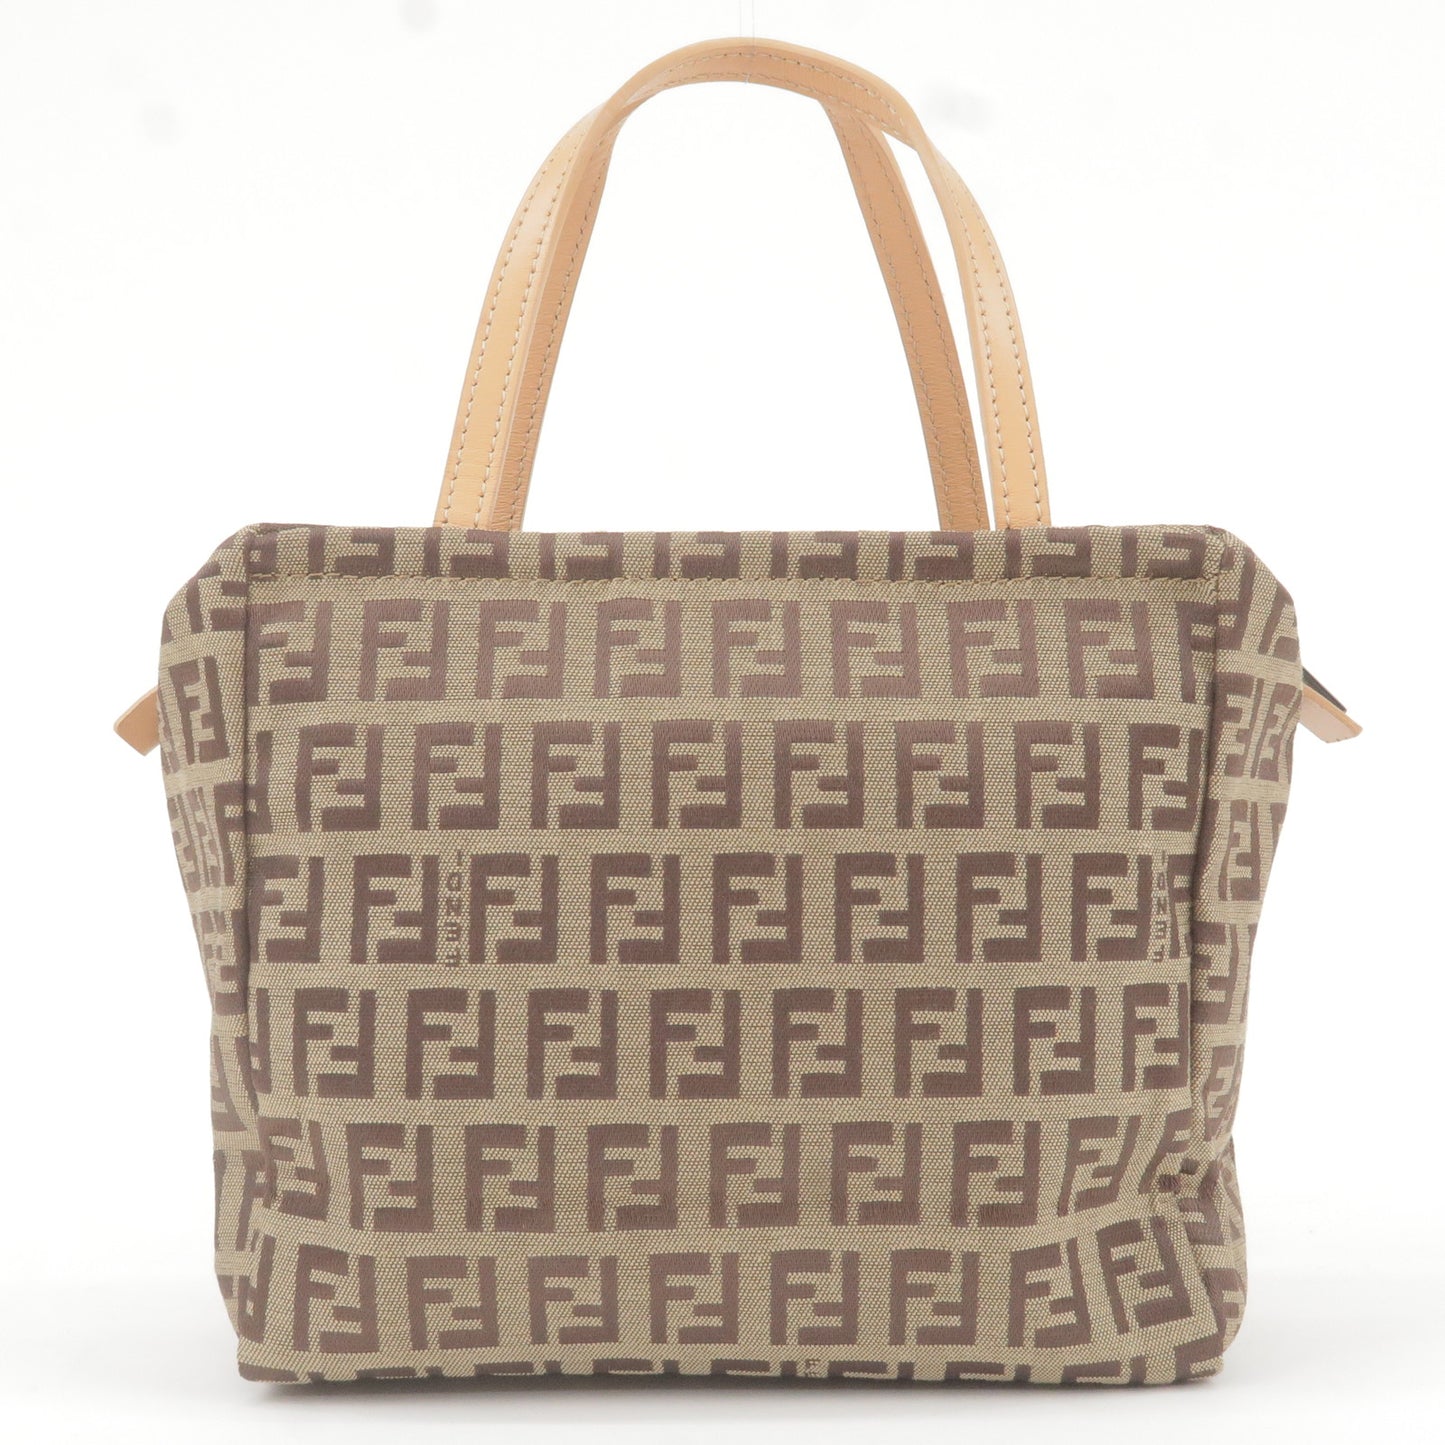 Fendi Zucchino Brown/Beige Roll Shoulder Tote Bag Canvas Leather Neverfull